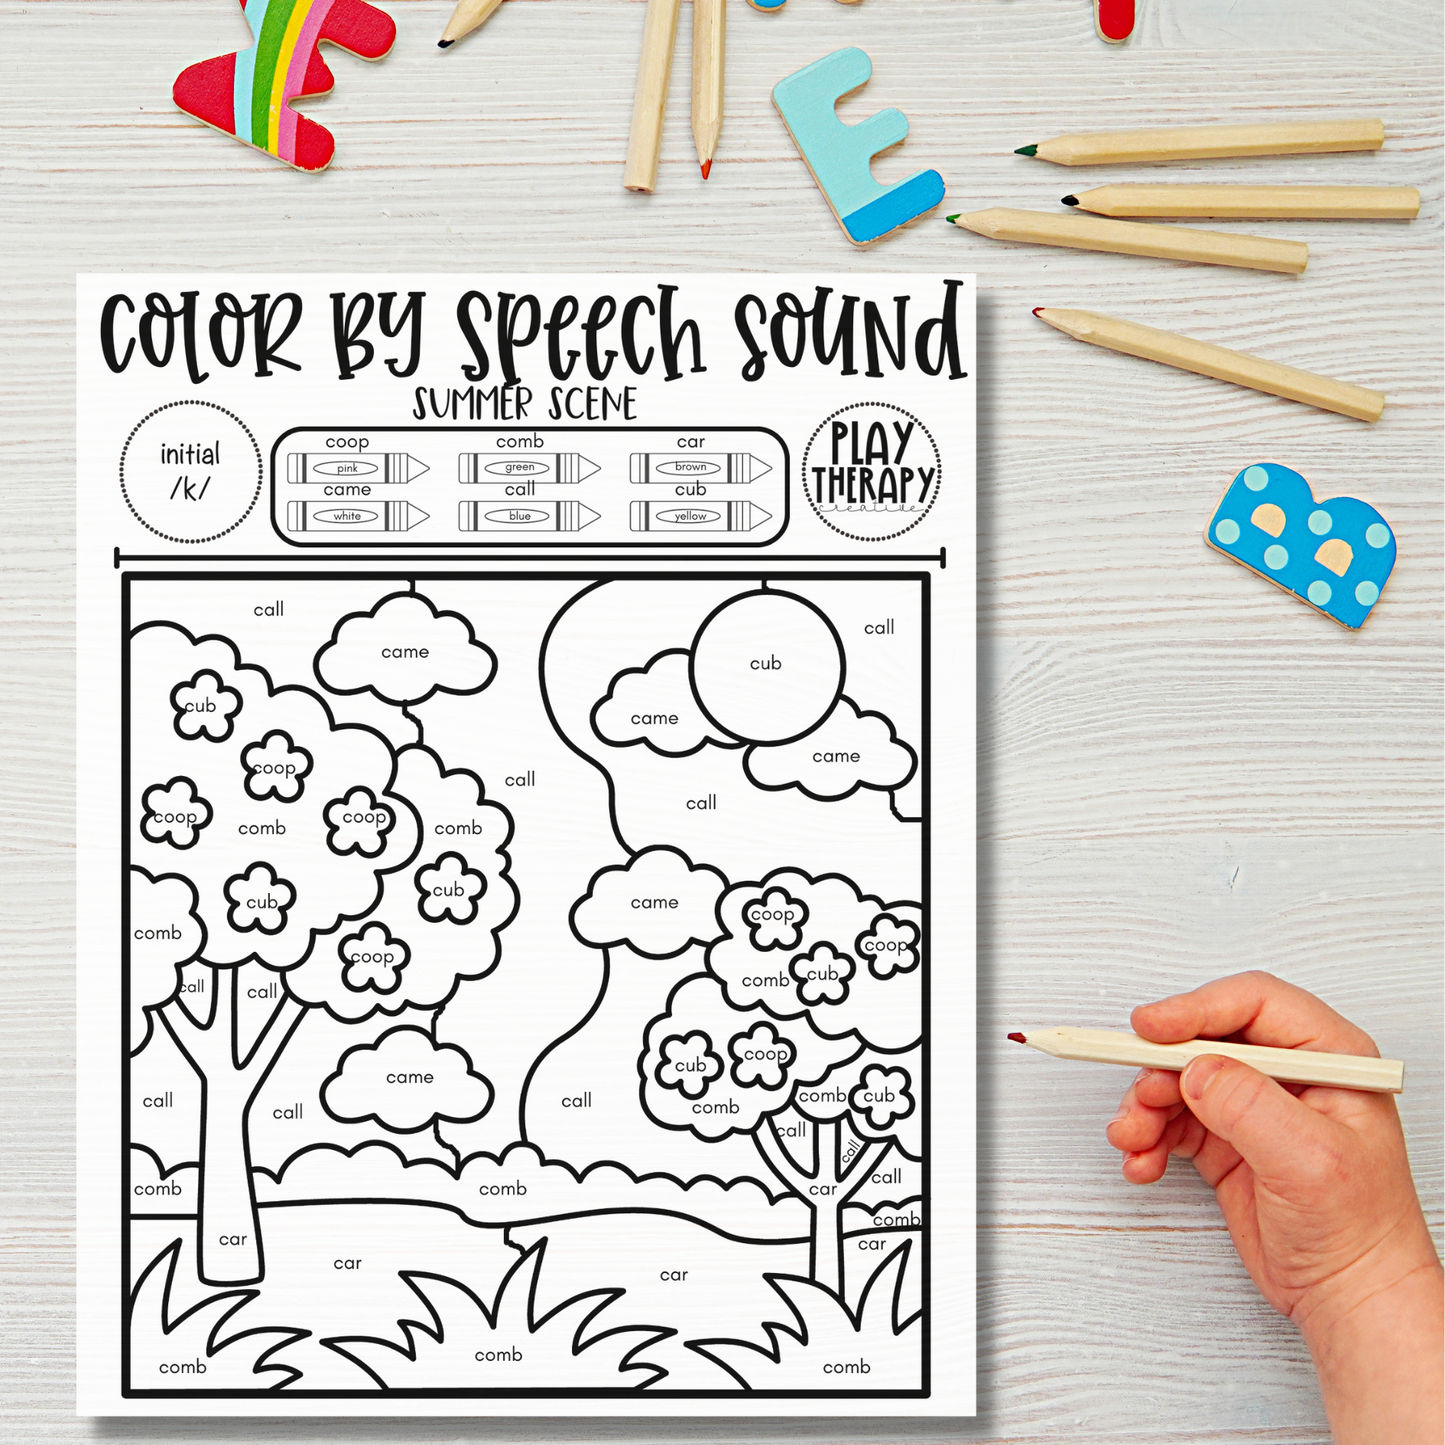 /k/ Sound Summer Themed Color-by-Speech-Sounds for Speech Therapy